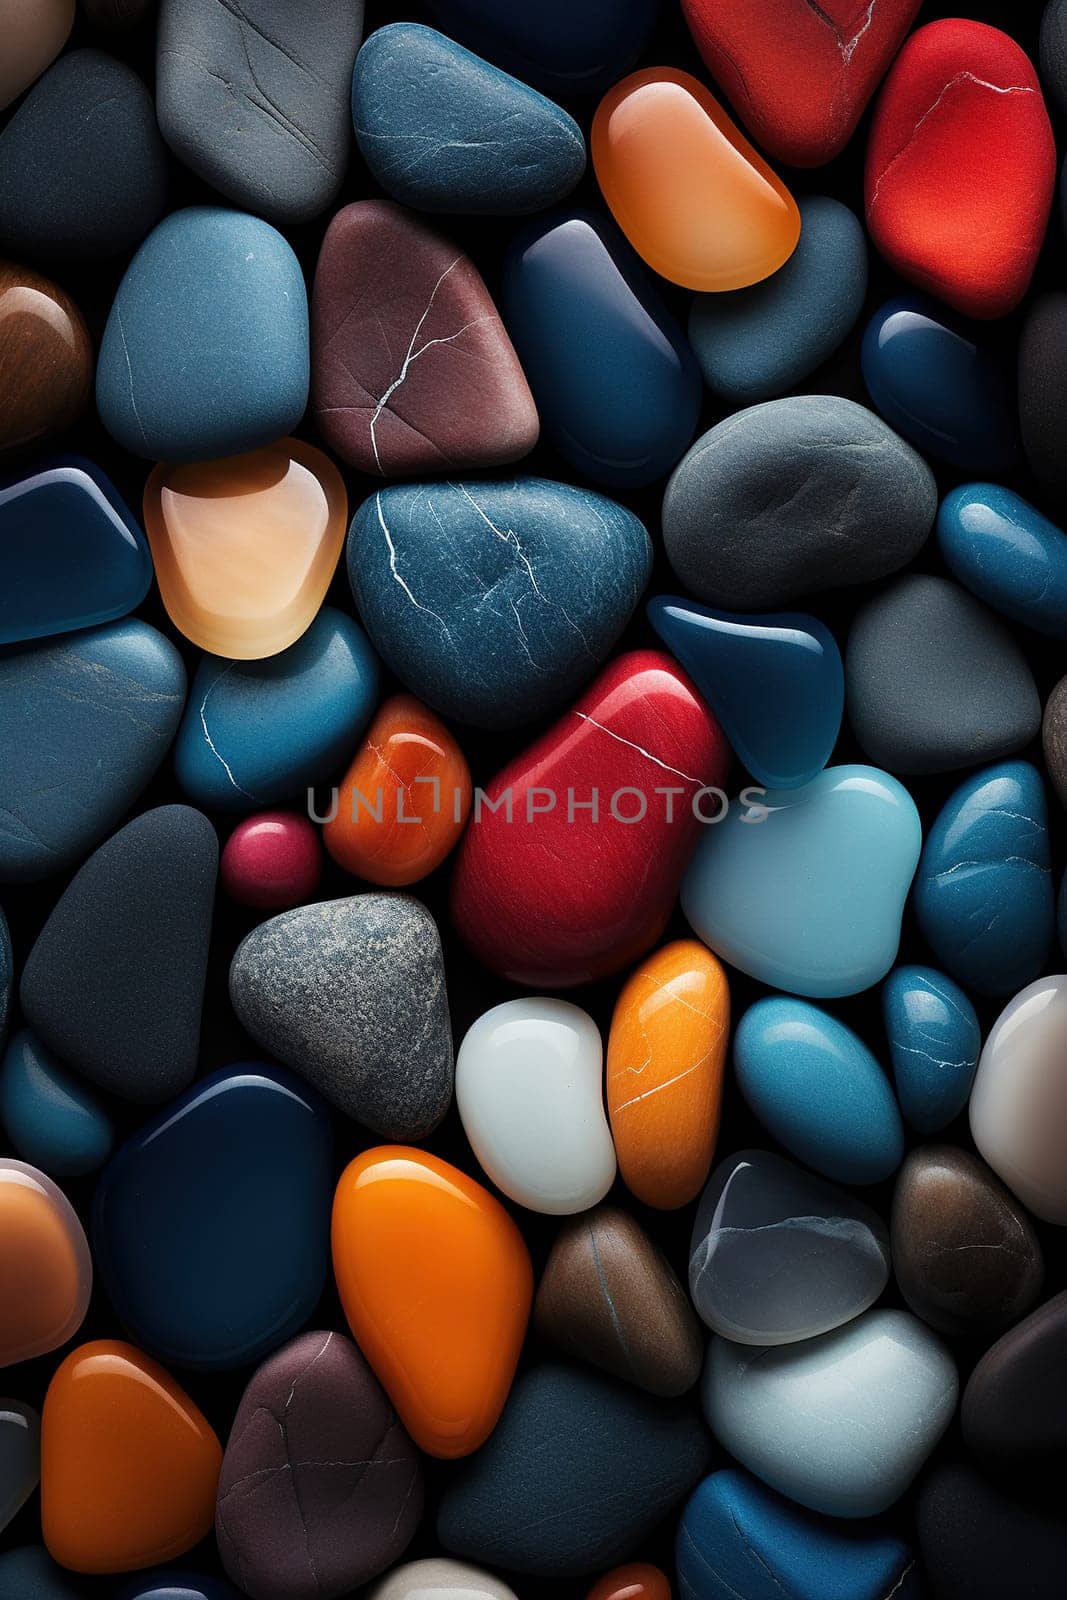 Vertical wallpaper made of multi-colored beach stones. Background of colored pebbles.